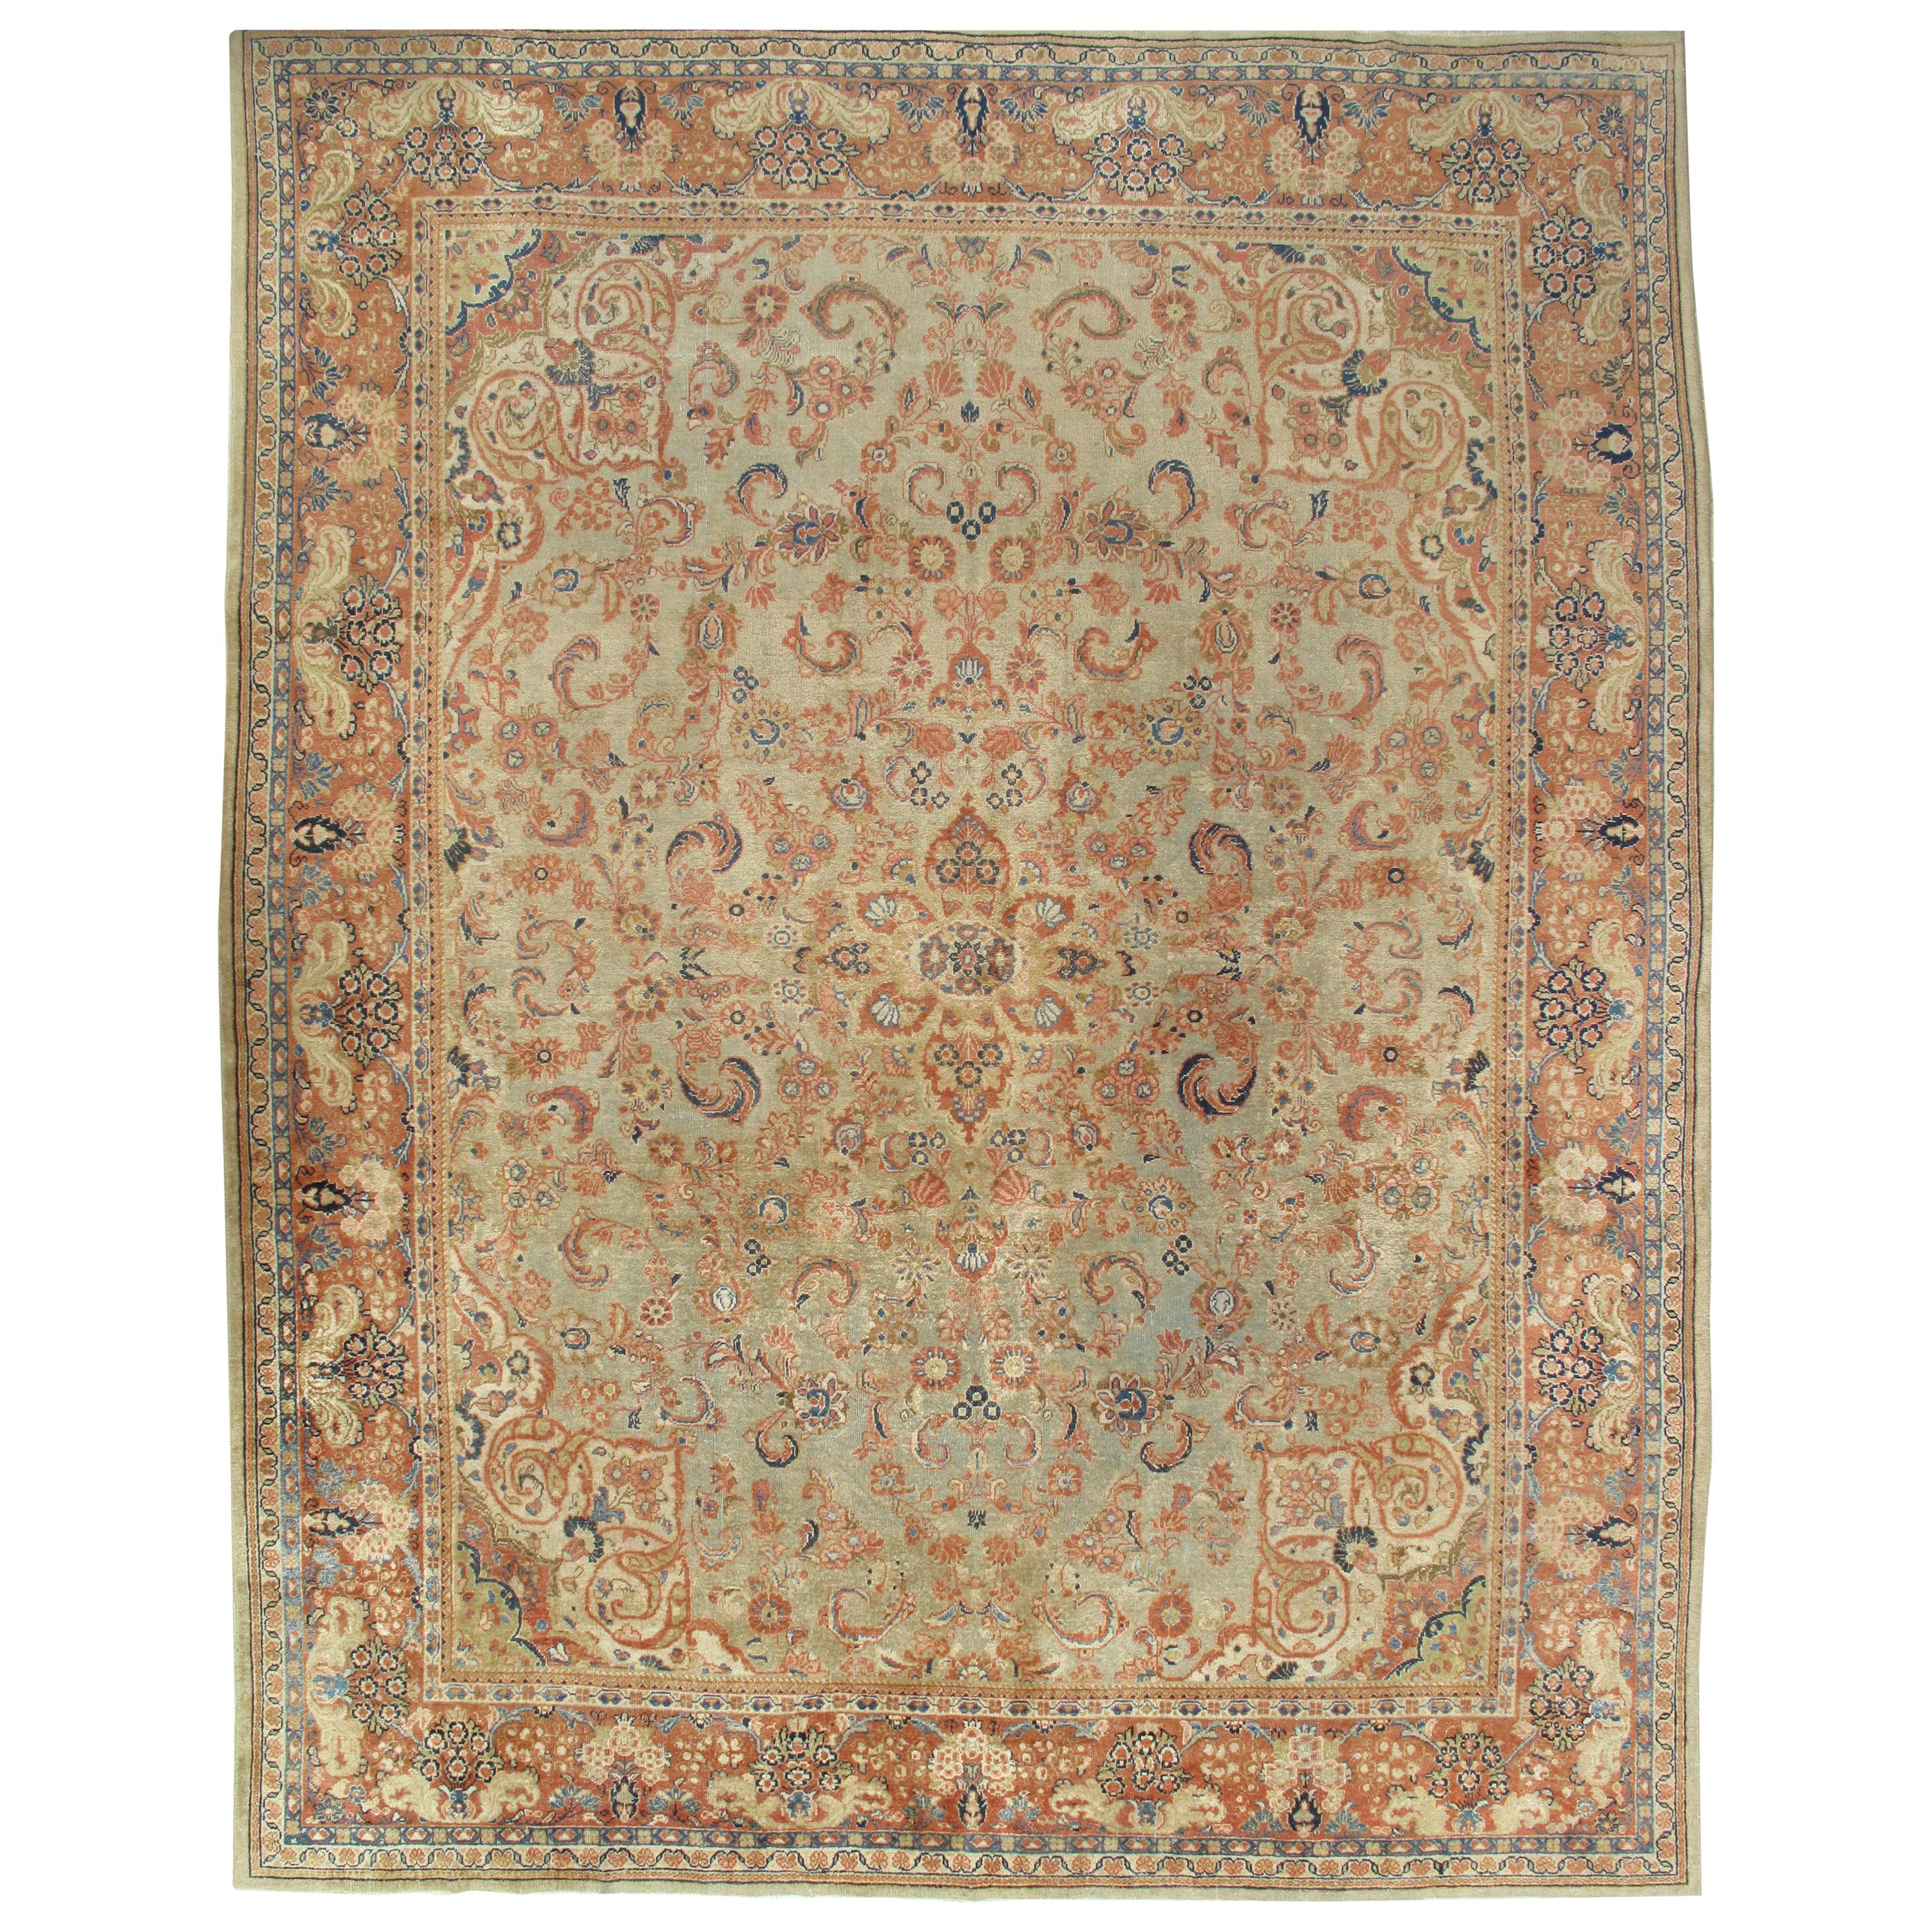 Antique Mahal Rug, Handmade Oriental Rug, Pale Green, Rust and Navy Blue For Sale